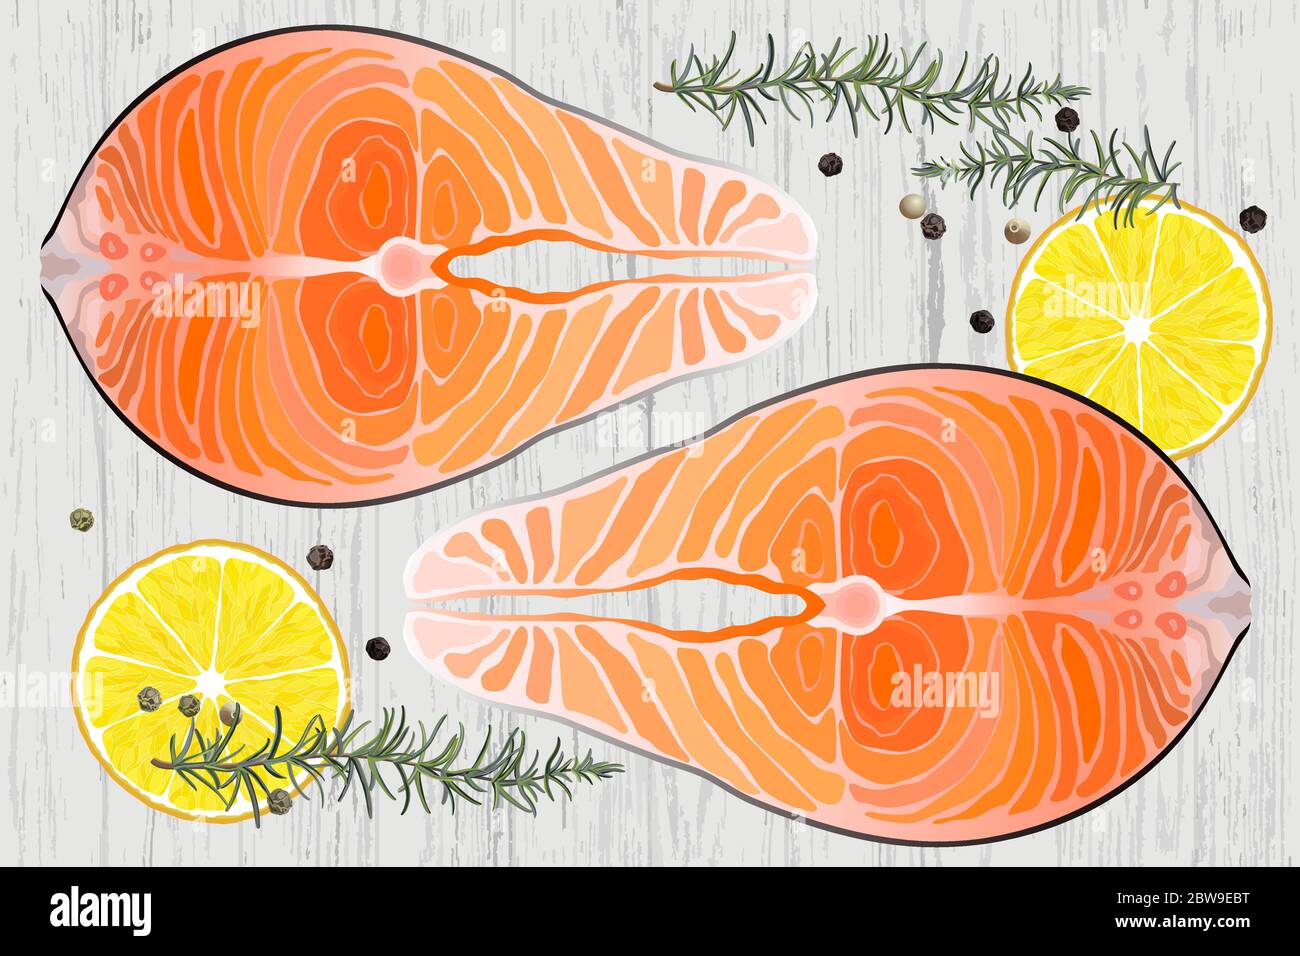 Salmon raw steak red fish top view vector illustration Stock Vector